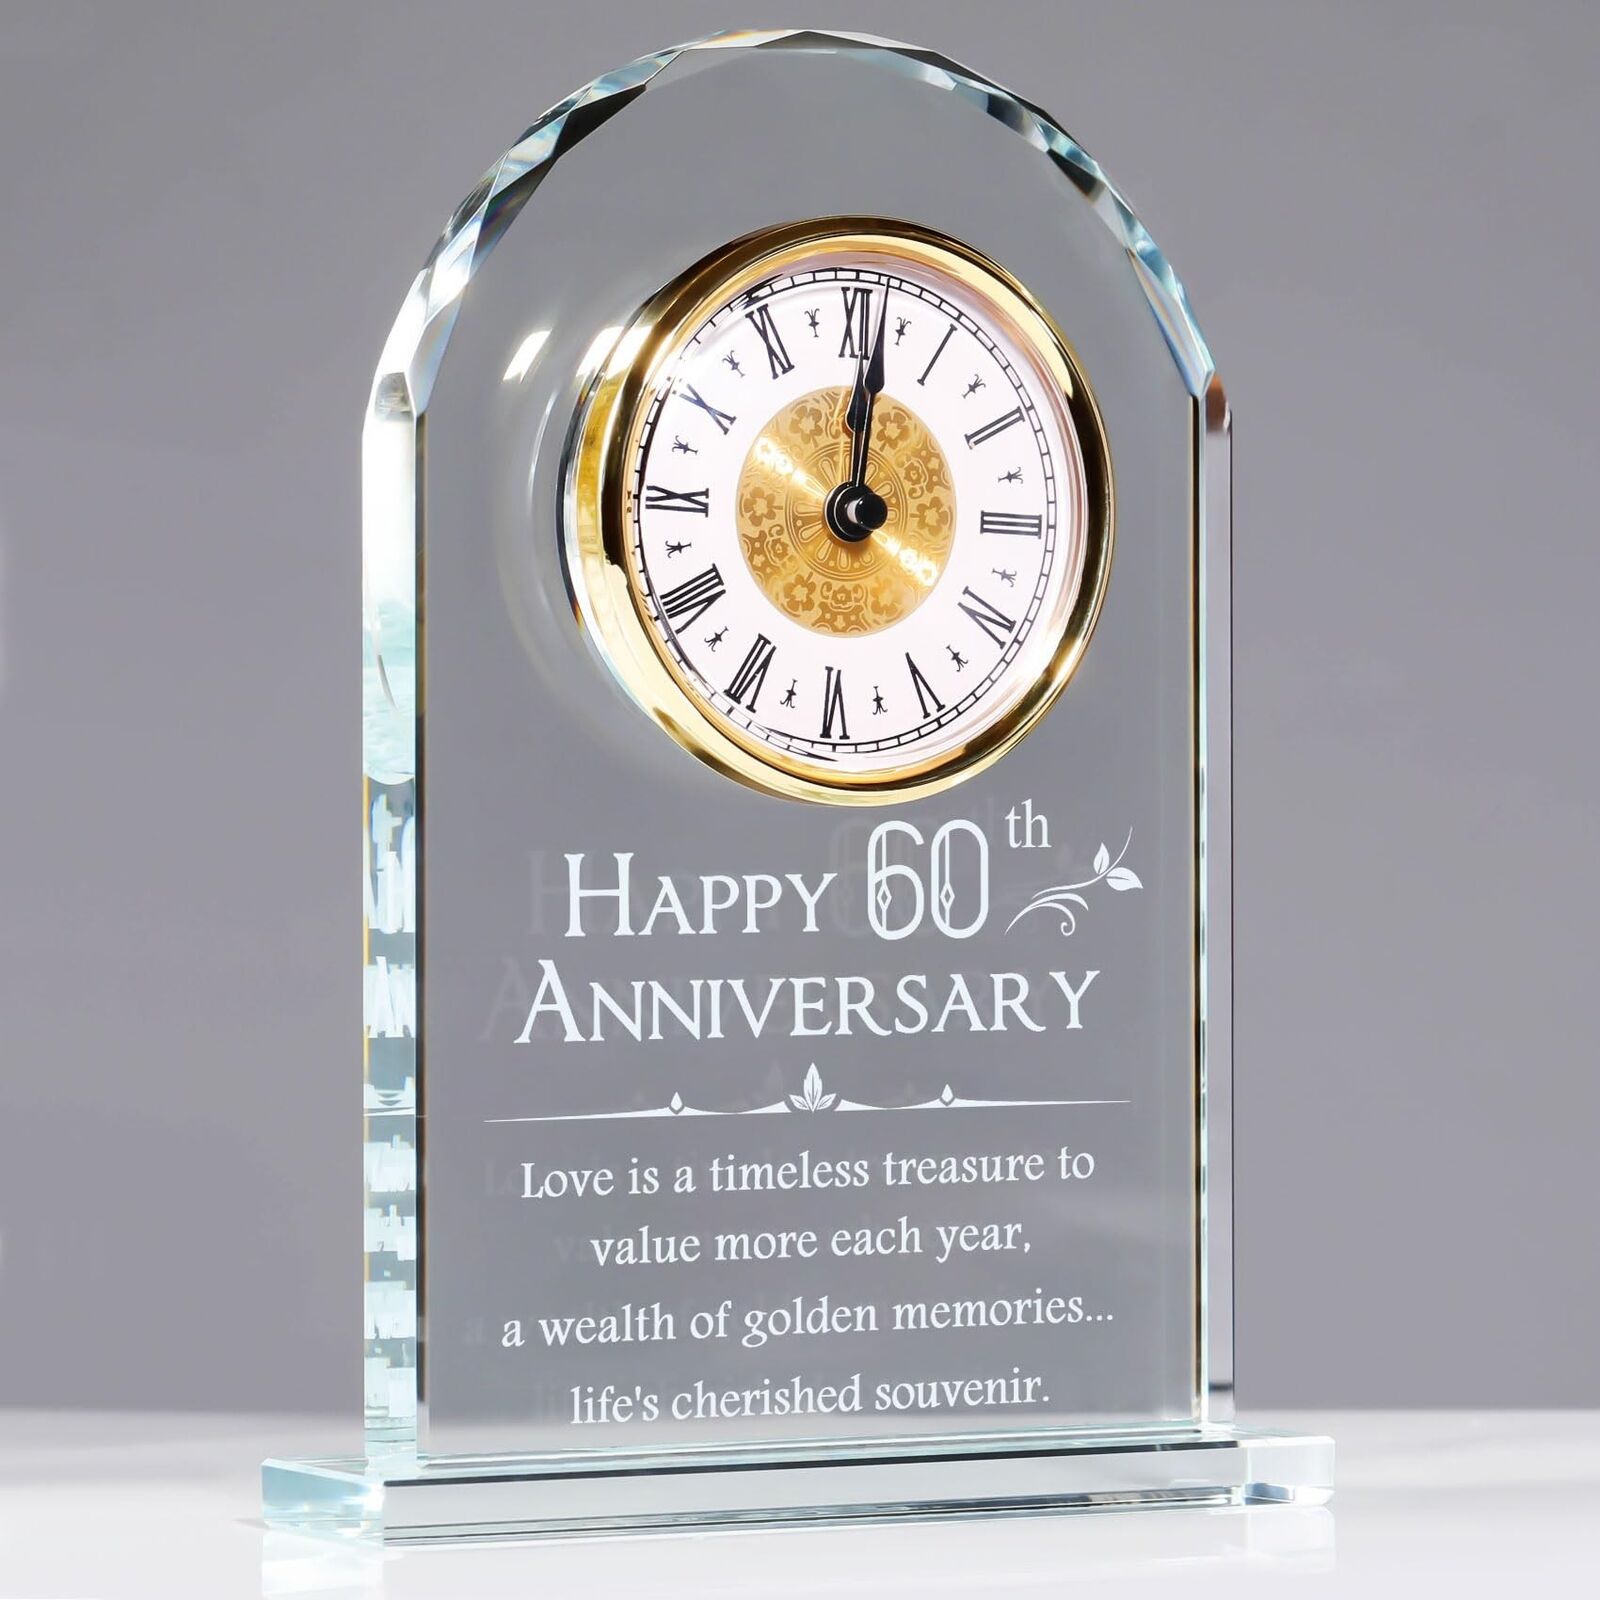 YWHL 60th Anniversary Quartz Clock Gifts for Parents Grandparents, 60 Year We...